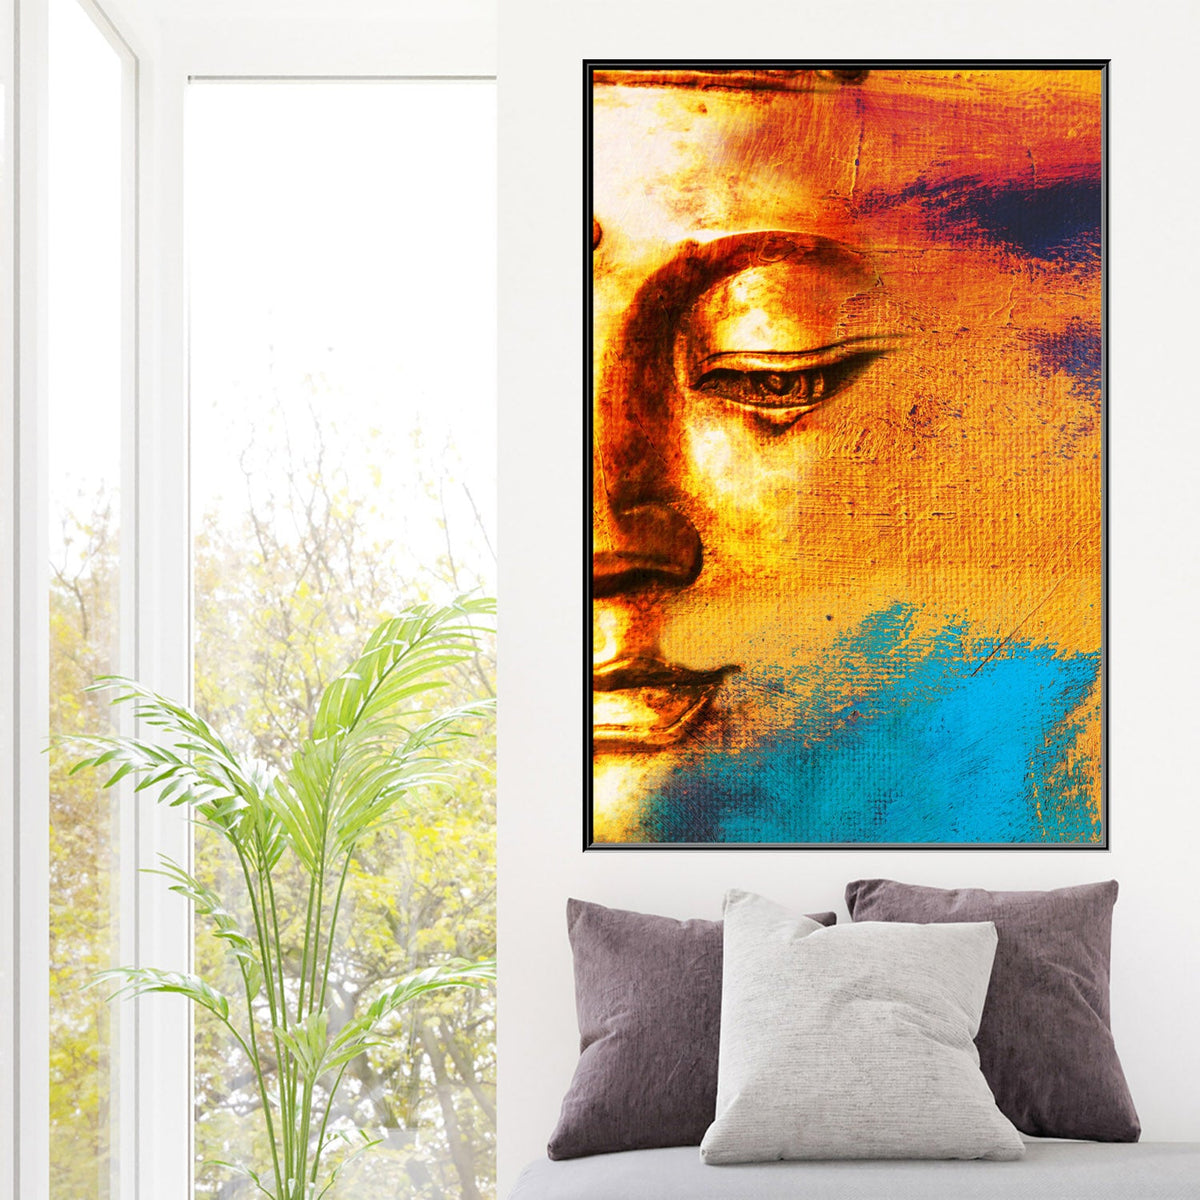 https://cdn.shopify.com/s/files/1/0387/9986/8044/products/AbstractBuddhaFloatingFrame-1.jpg